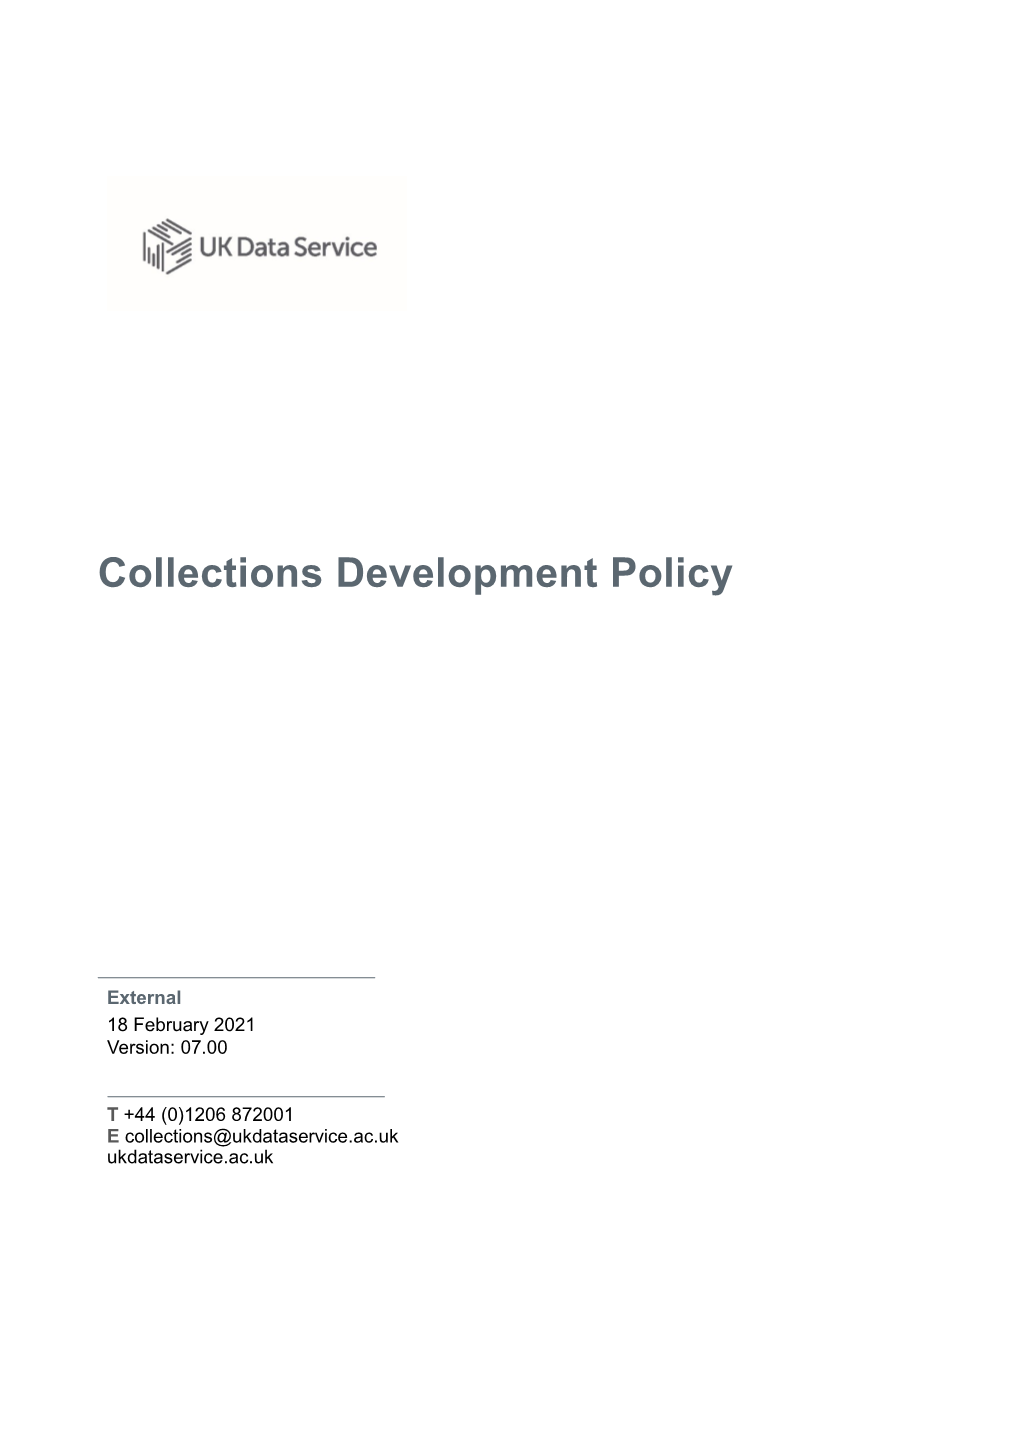 UK Data Service Collections Development Policy